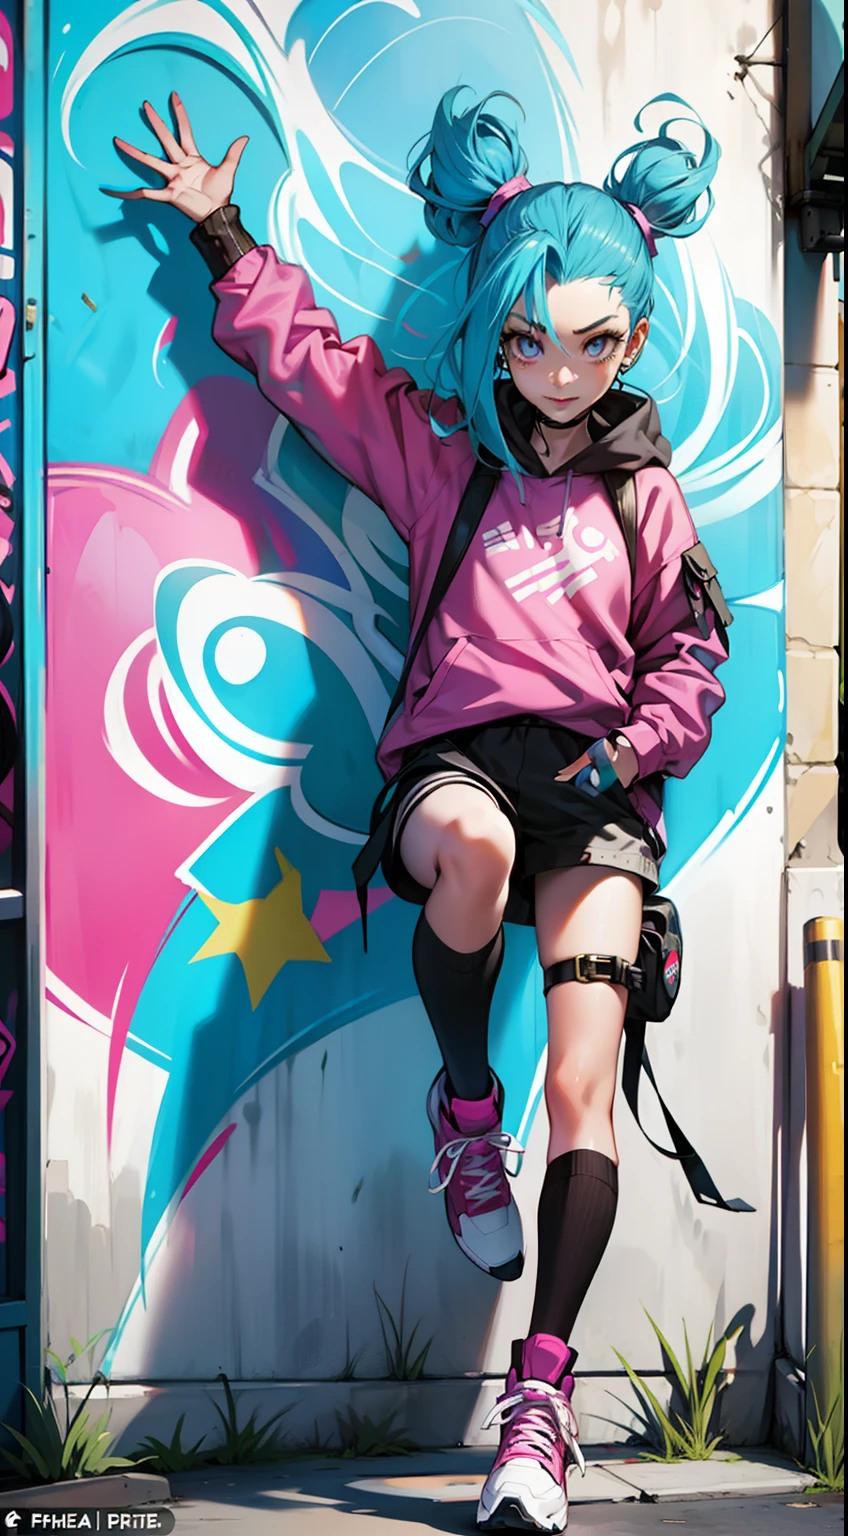 Energetic graffiti: Decorate the walls around Jinx, Energetic graffiti depicts her misadventure, Add a touch of urban art to the scene.